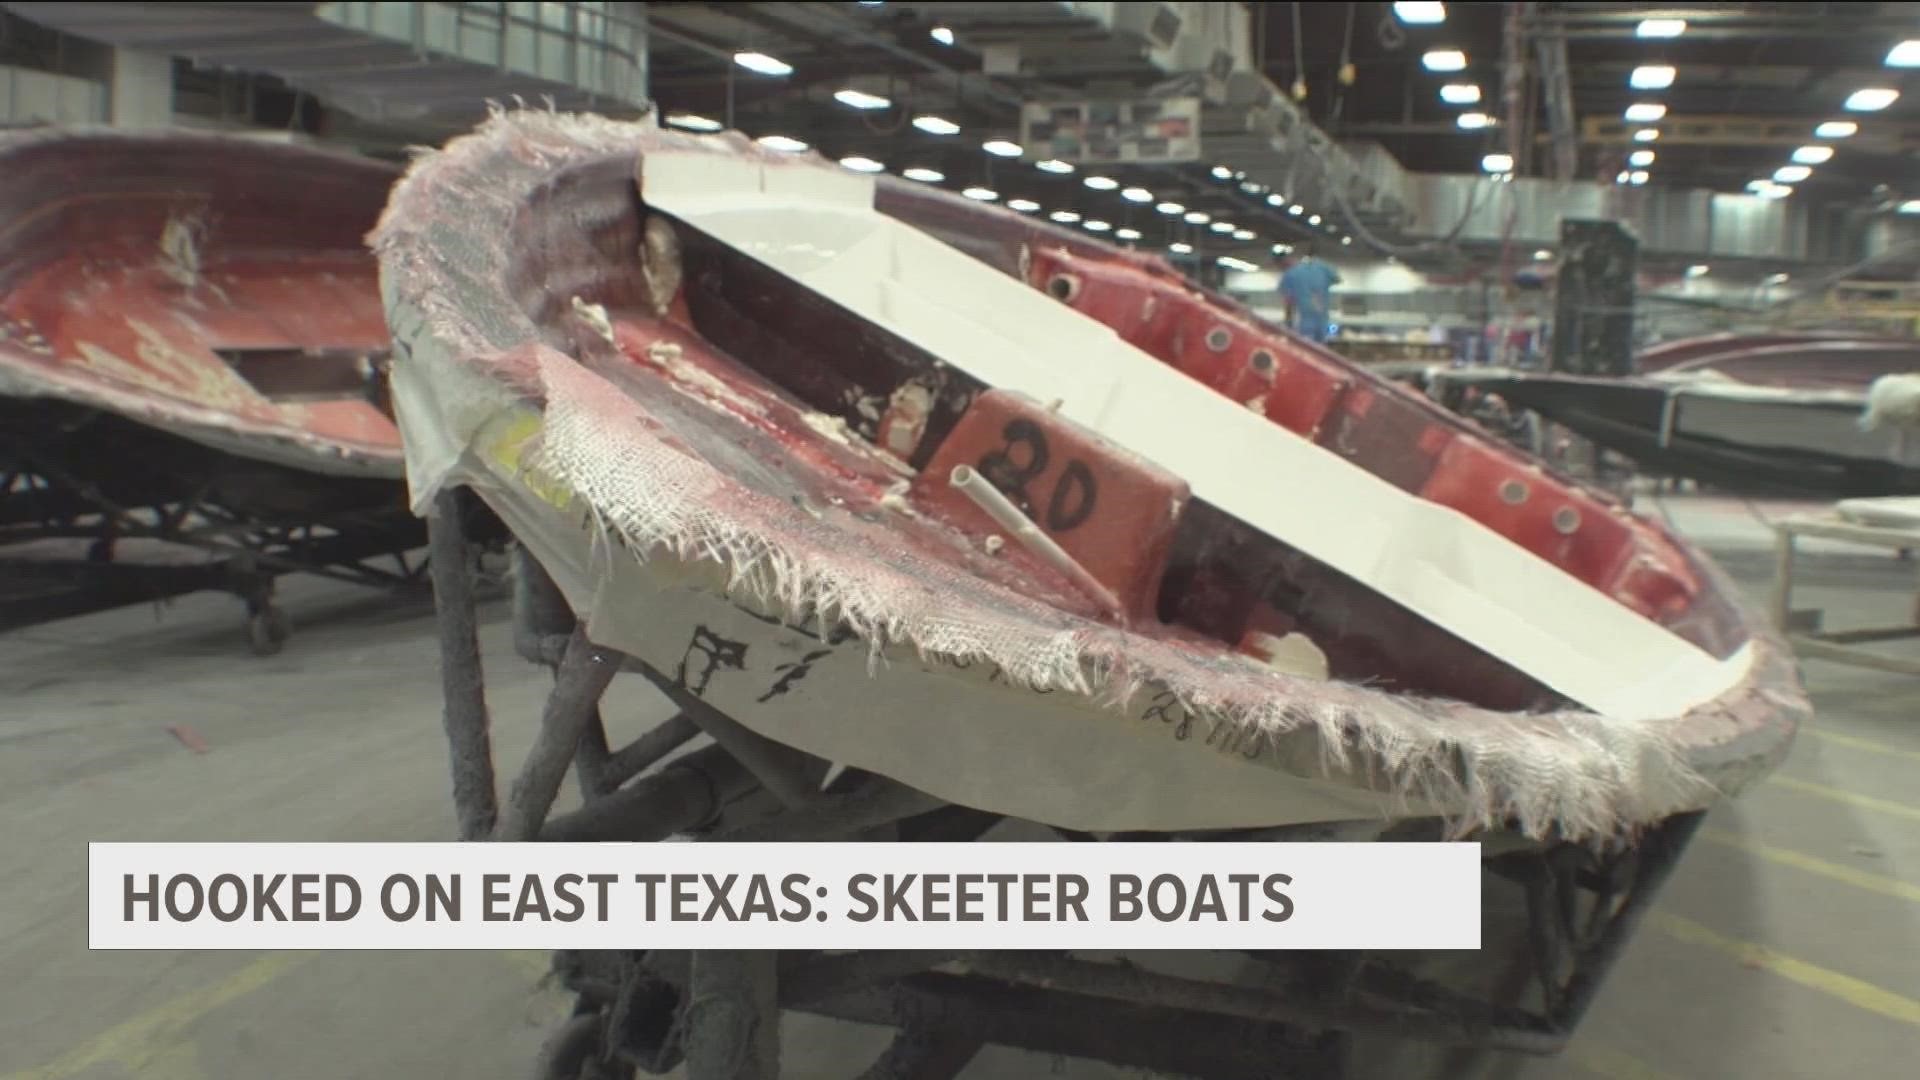 For more Hooked On East Texas stories, visit cbs19.tv/hooked-on-east-texas